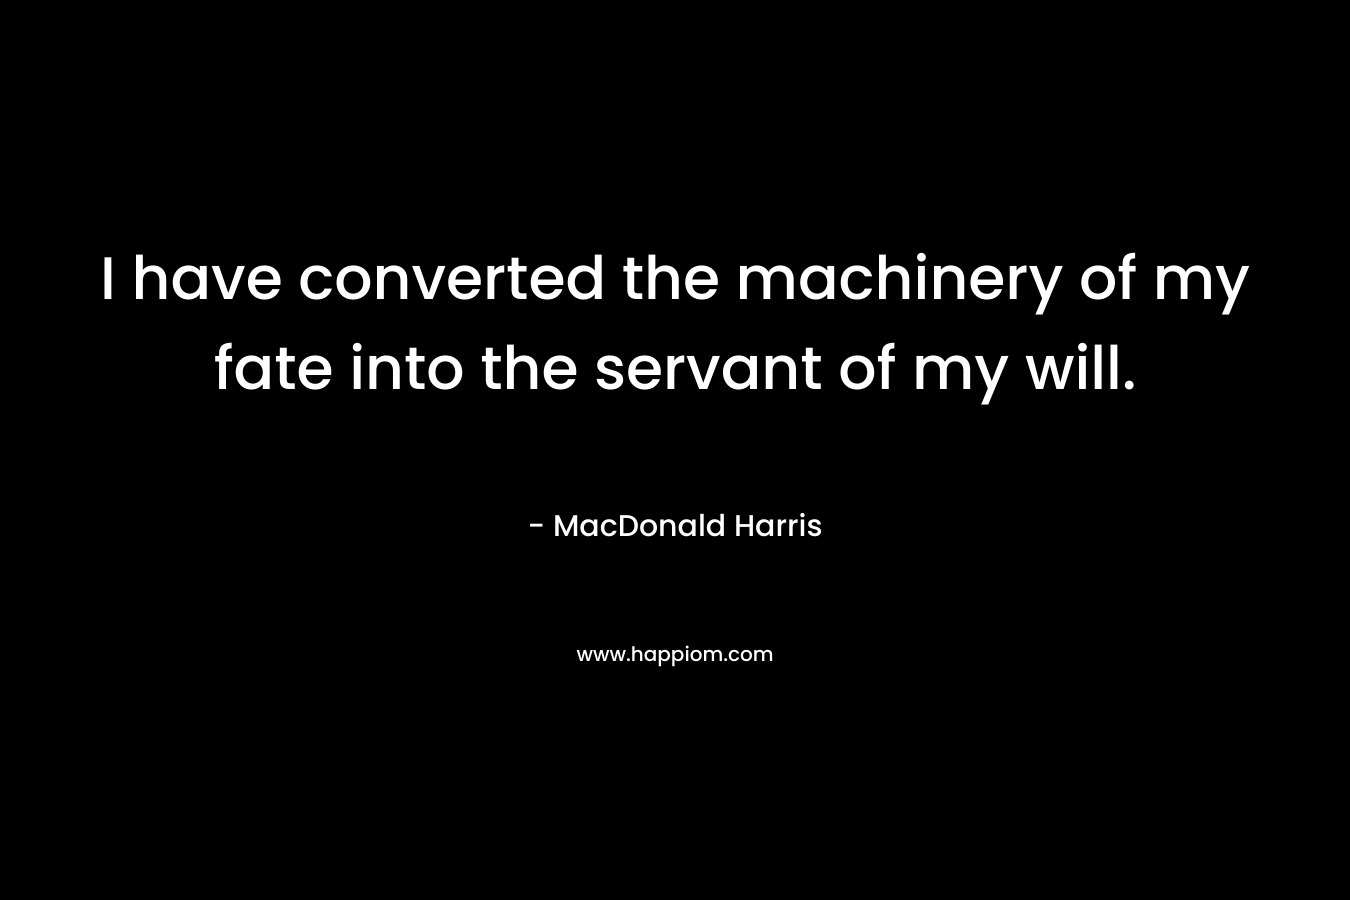 I have converted the machinery of my fate into the servant of my will. – MacDonald Harris